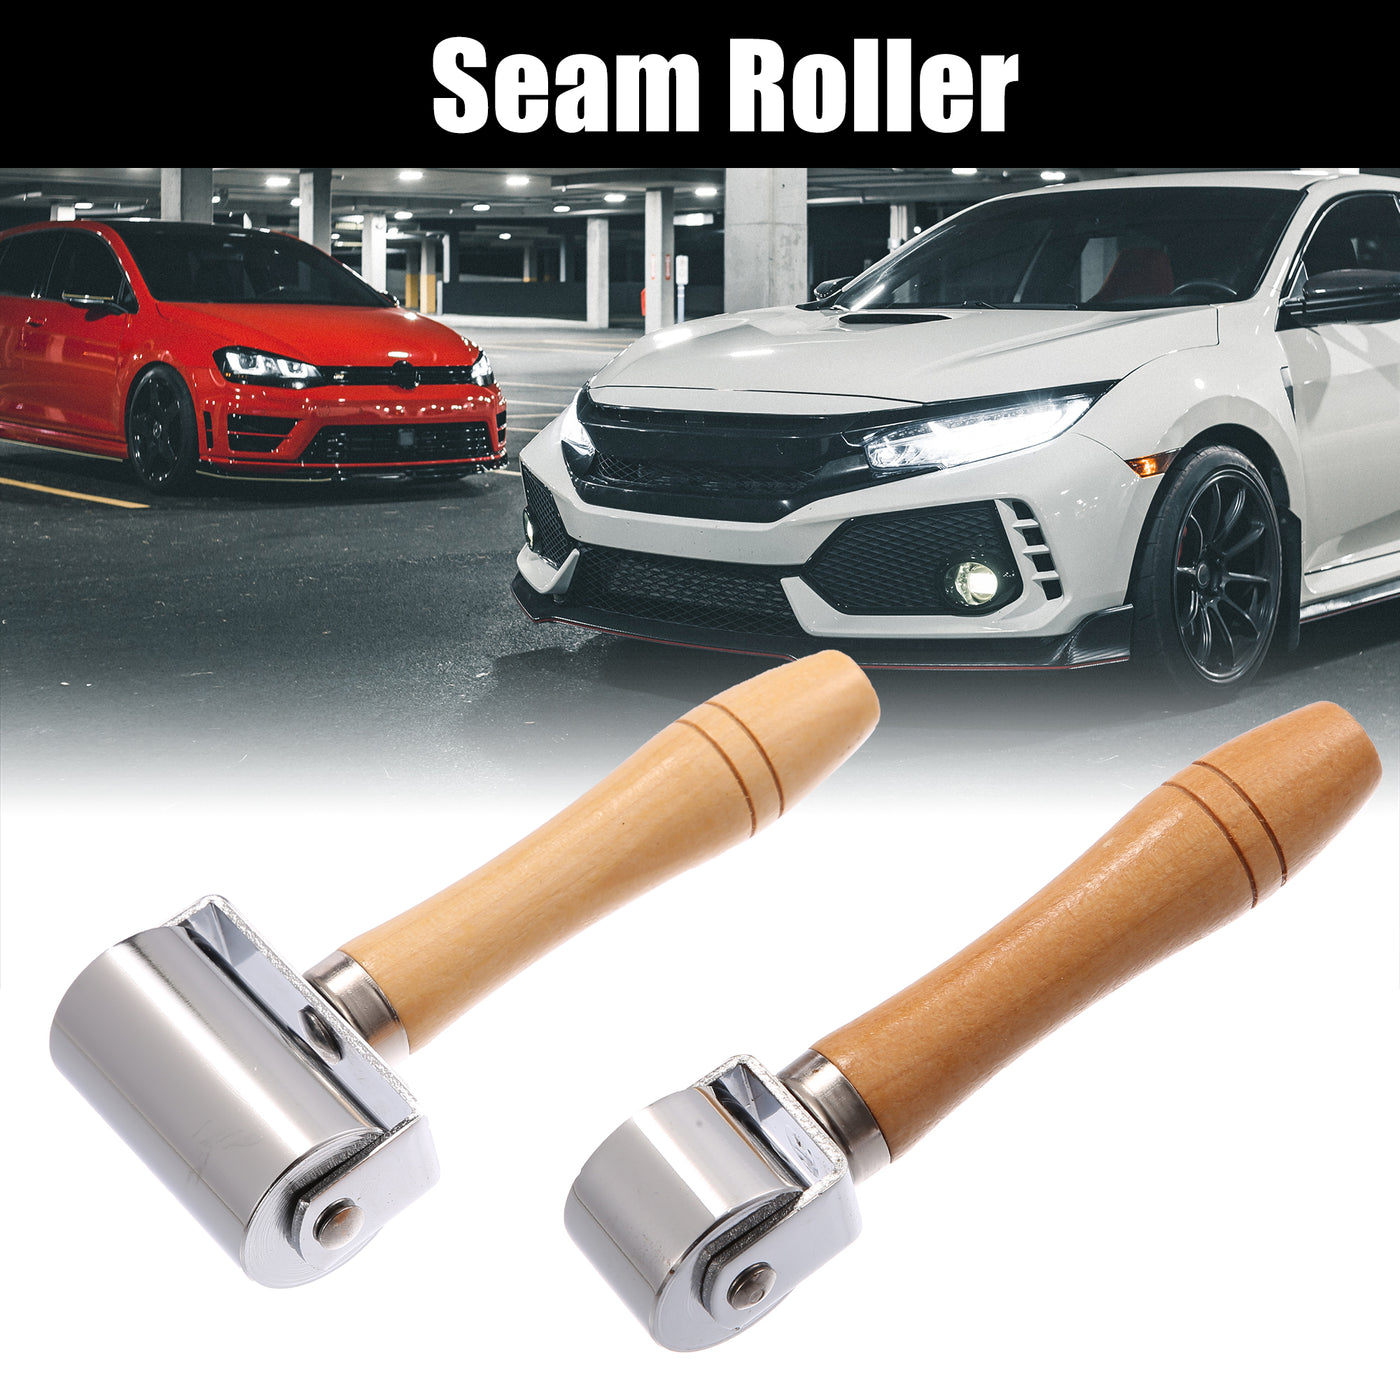 X AUTOHAUX 1Set Steel Seam Roller 2.5cm/0.98" and 6cm/2.36" Roofing Bearing Flat for Wallpaper Car Audio Sound Deadener Auto Noise Pressure Smoothing Laminate Paint DIY Tool